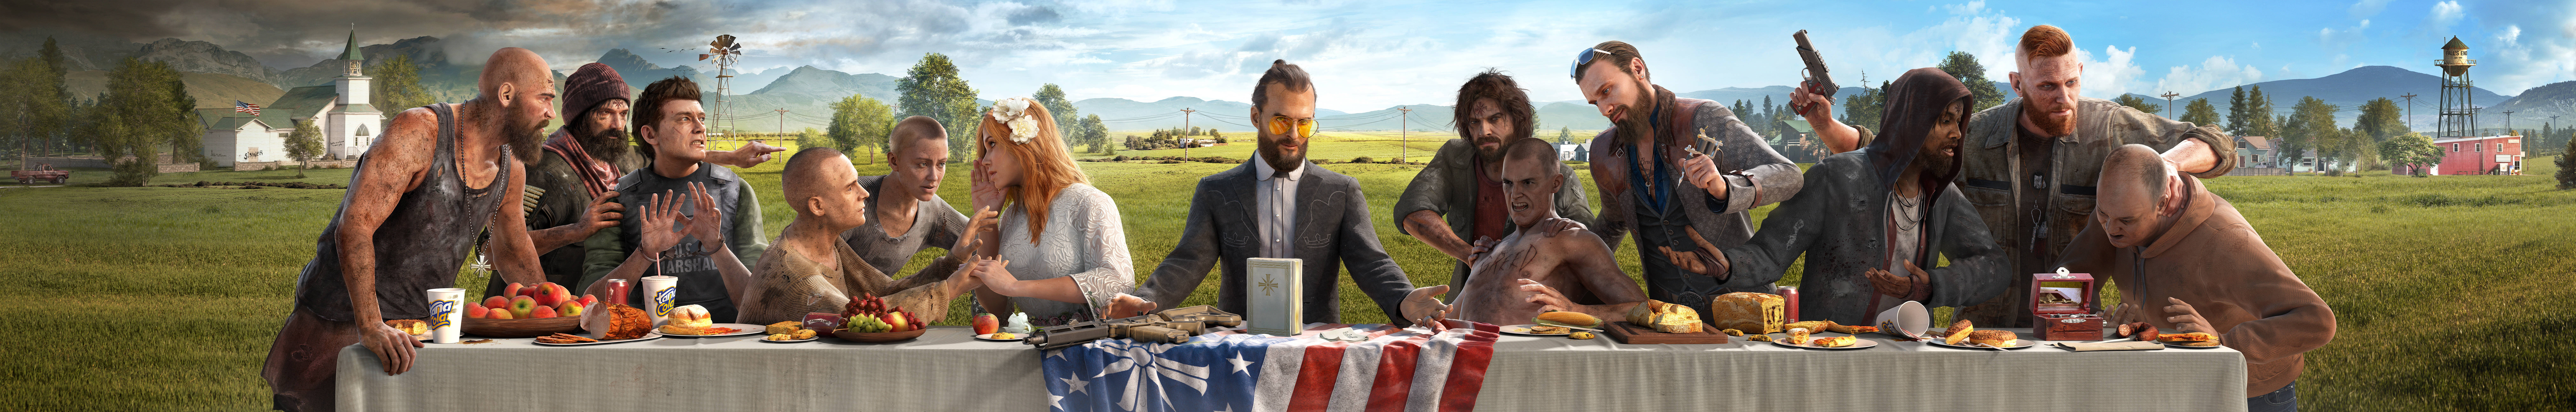 Far Cry 5 Cult Members Picture